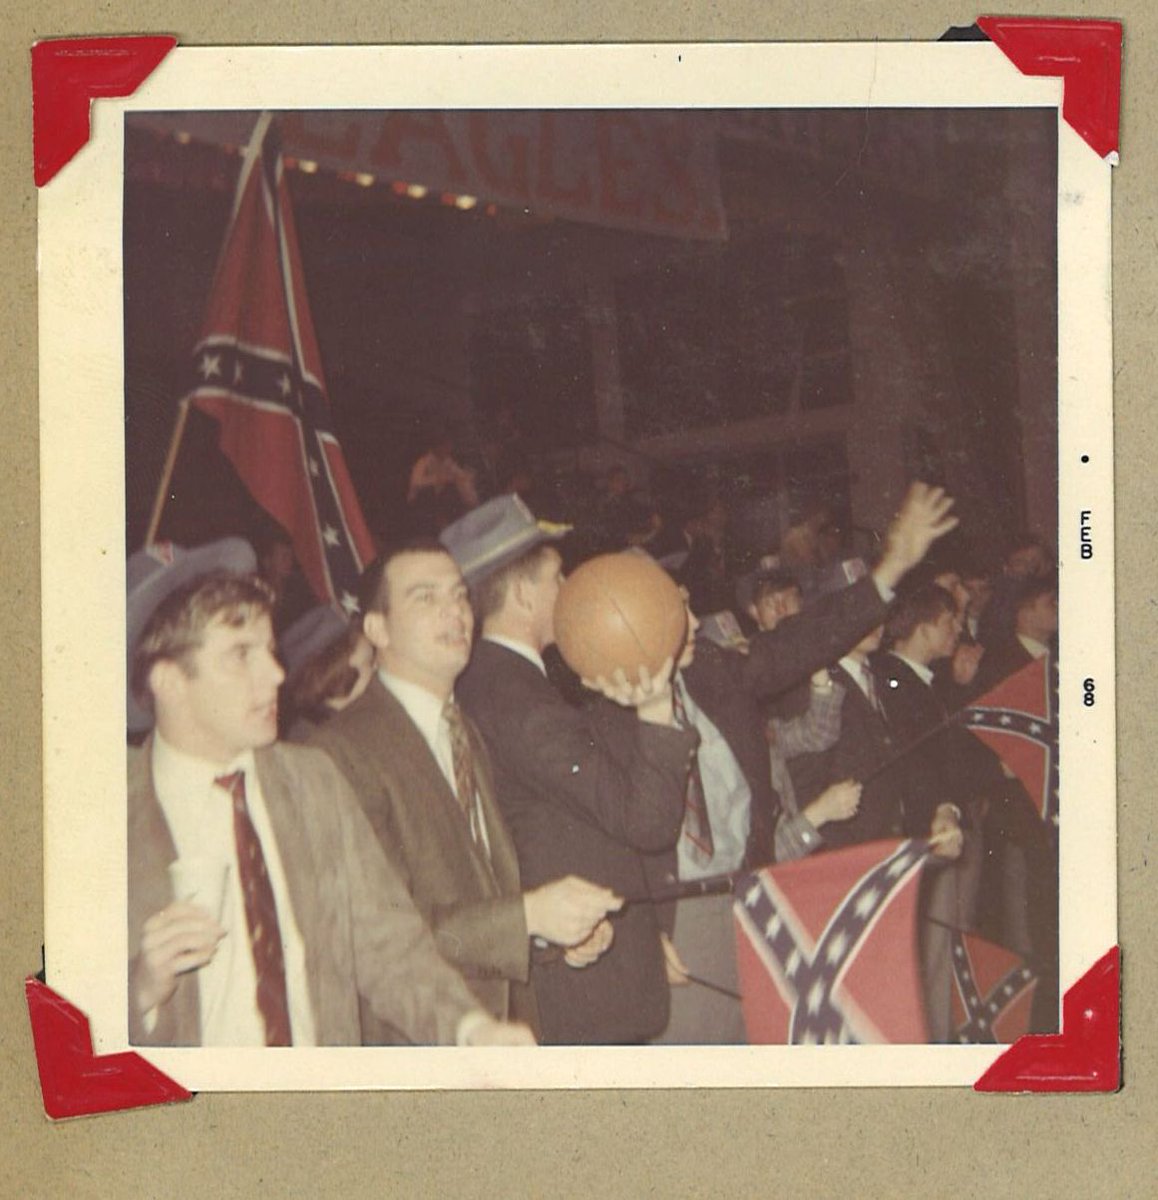 In the 1960s, MTSU also welcomed its first white fraternities. Kappa Alpha in particular used the Confederate flag as part of the frat's image. They adorned the flag at sporting events. "Dixie" was also the school's official fight song.  #ForrestHall